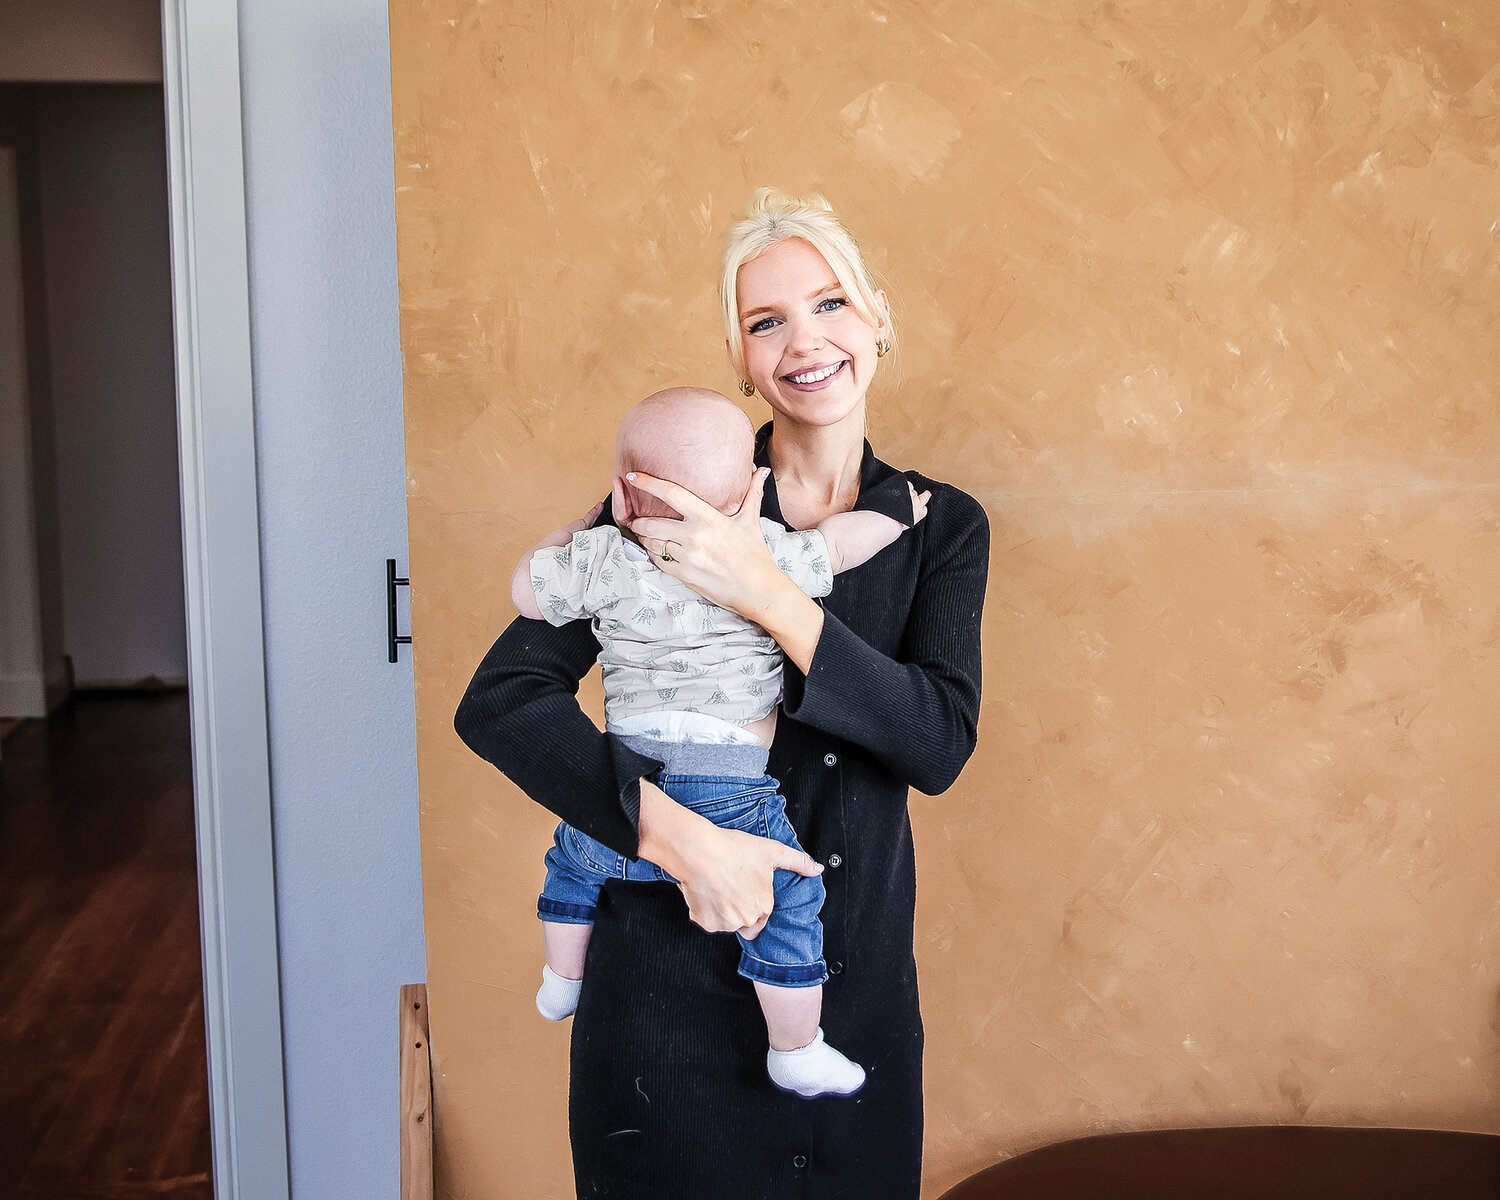 Em LeFrancq holds her child, Monroe, in front of a photo studio backdrop at Louie Jean Studios on Wednesday, May 3. Em LeFrancq owns the new photo studio and event space in Woodland with her husband, Carson LeFrancq.